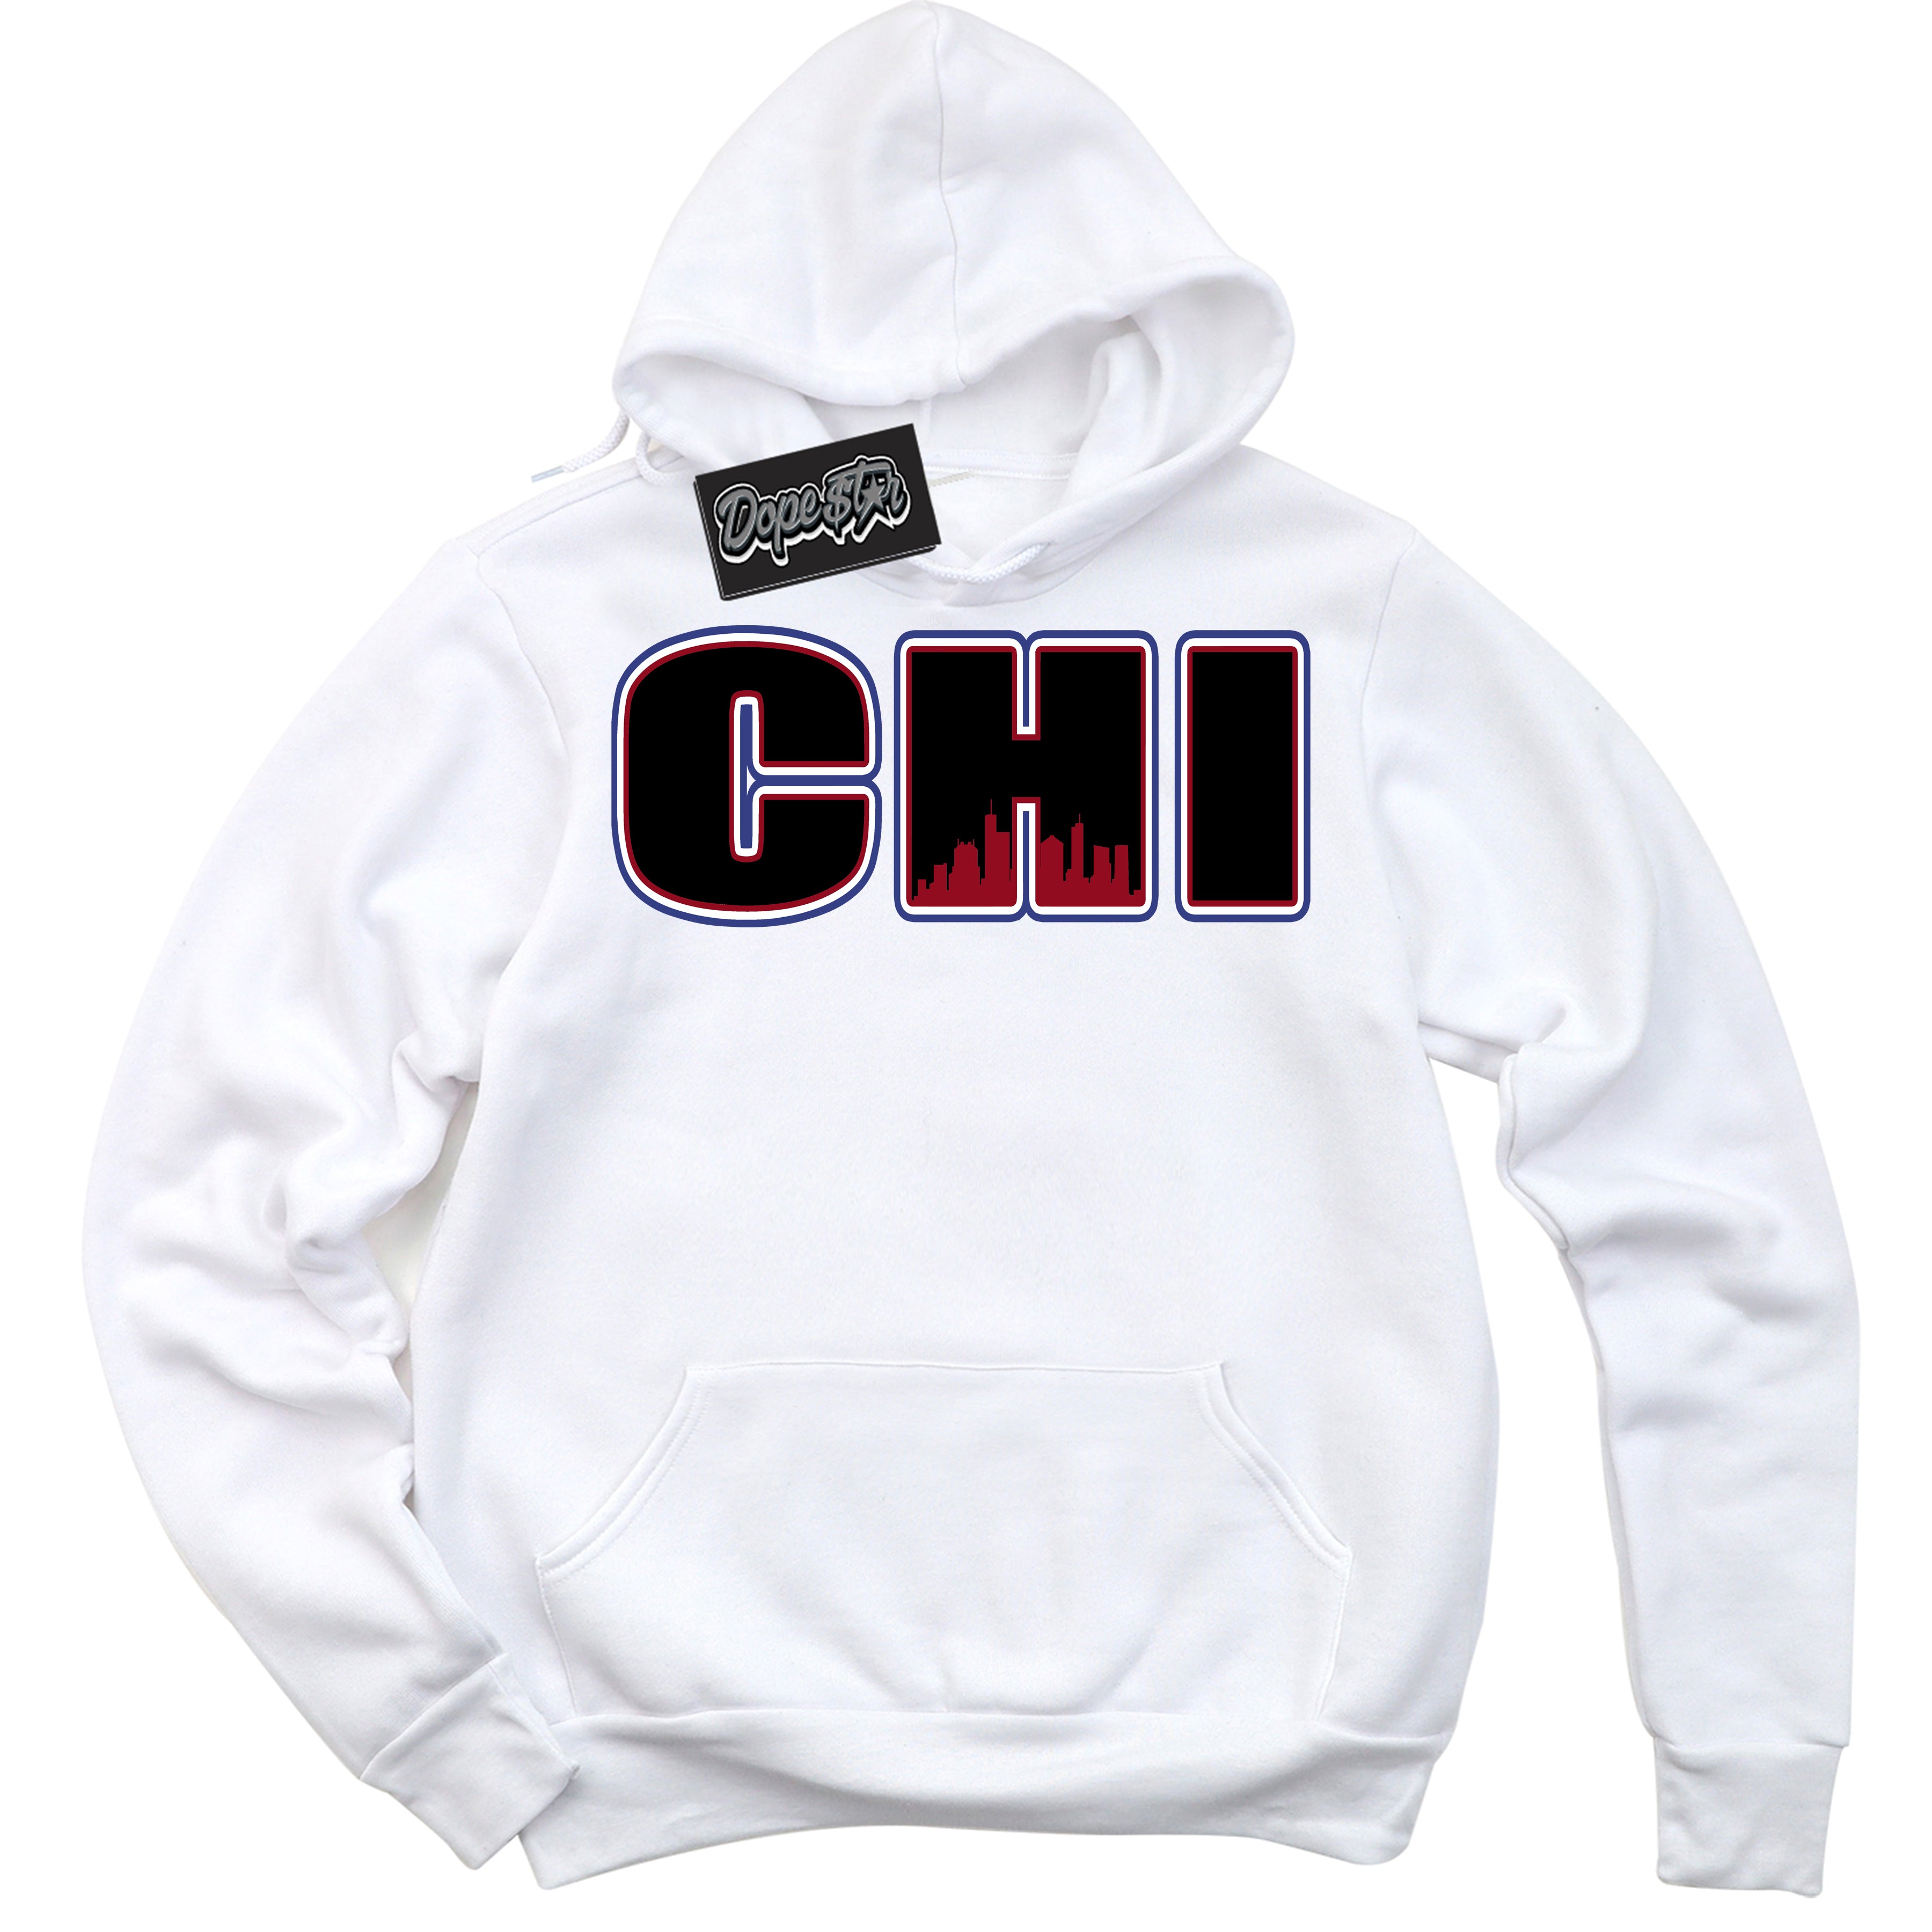 Cool White Hoodie with “ Chicago ”  design that Perfectly Matches Playoffs 8s Sneakers.